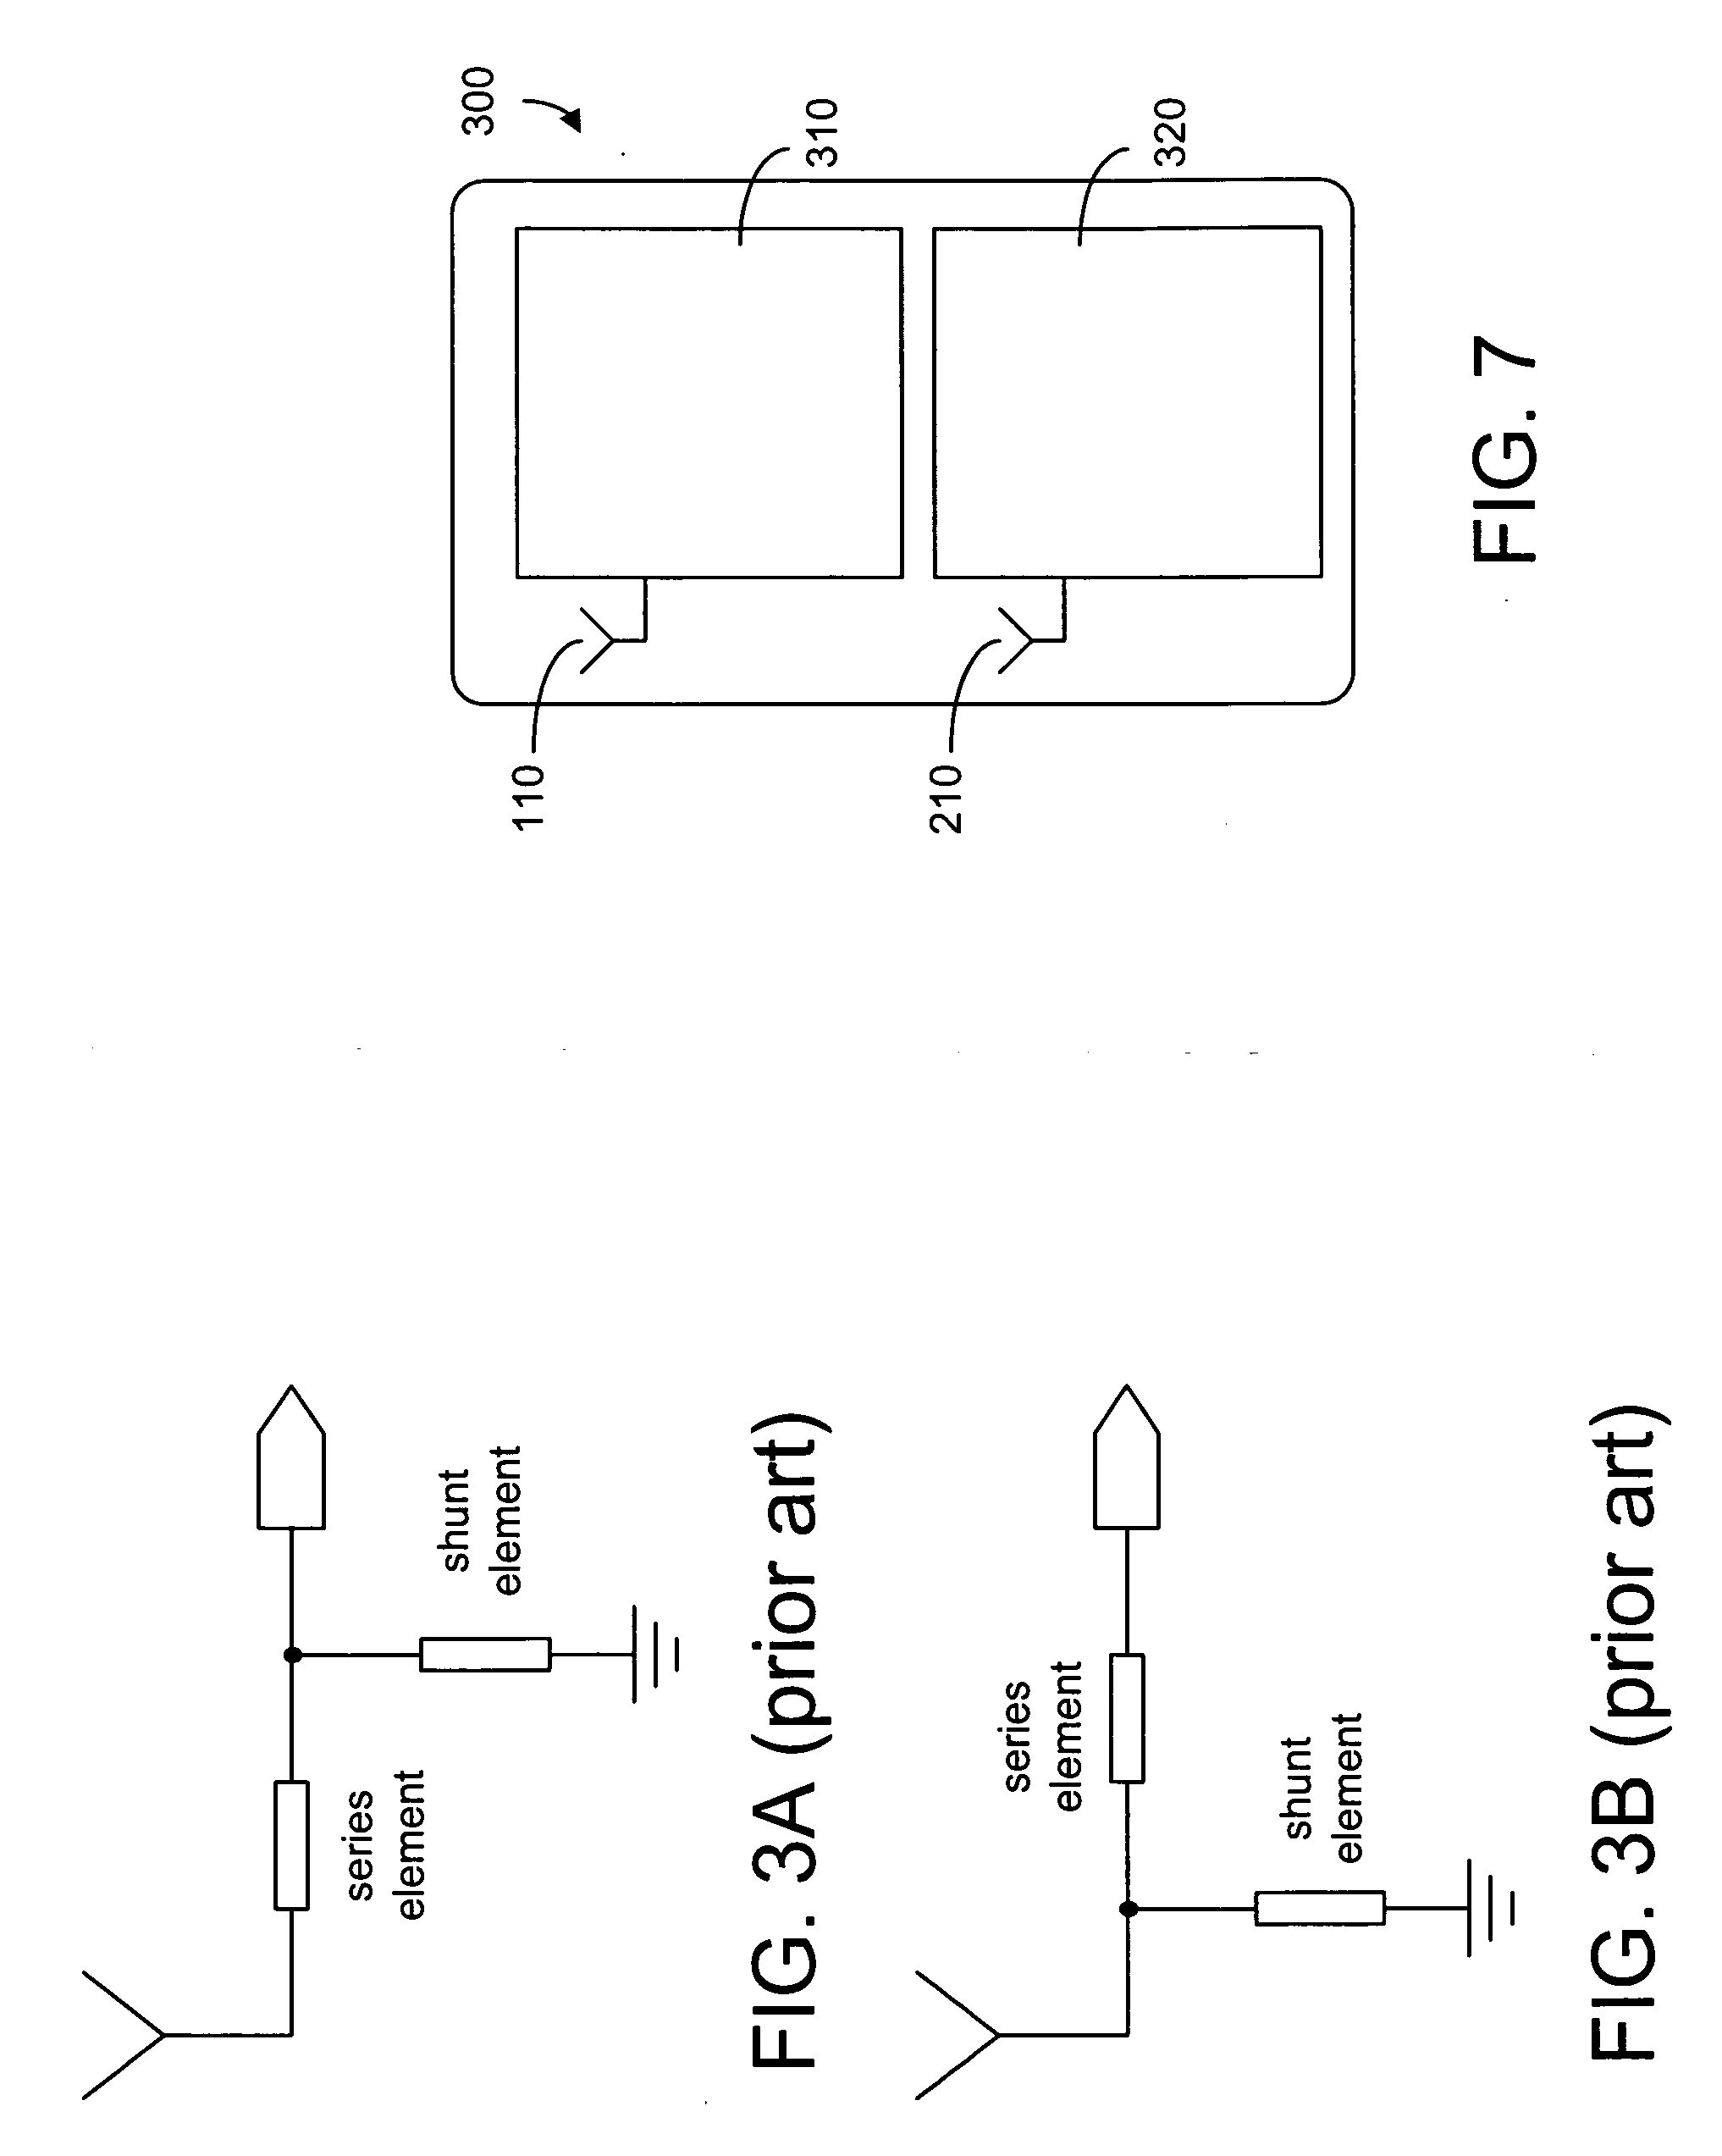 RF front-end architecture for a separate non-50 ohm antenna system